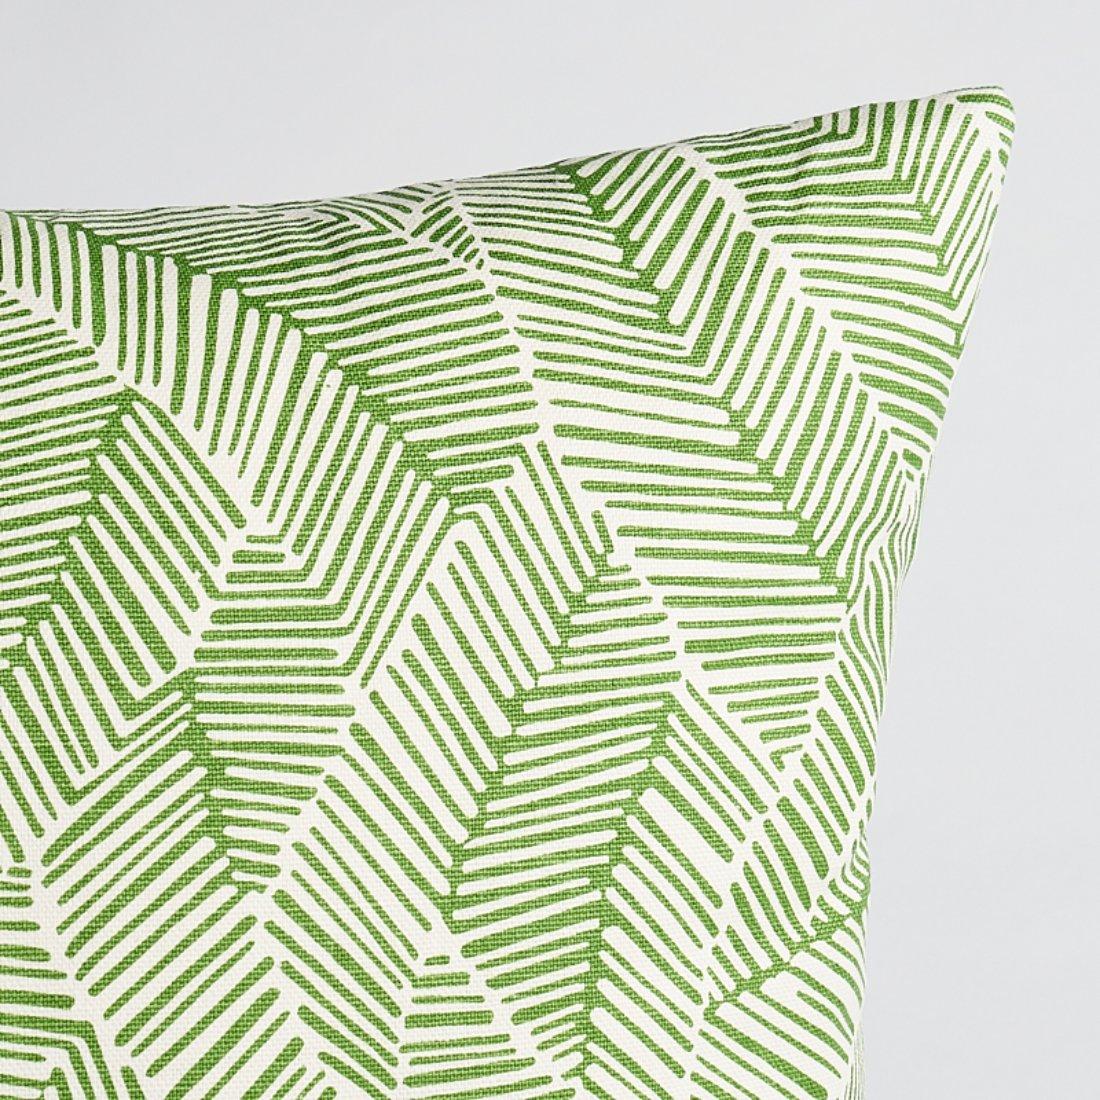 This pillow features Abstract Leaf with a Knife Edge finish. Dense foliage is pared down to a graphic play of lines in this chic, abstracted pattern. Pillow includes a feather/down fill insert and hidden zipper closure.

*If out of stock,